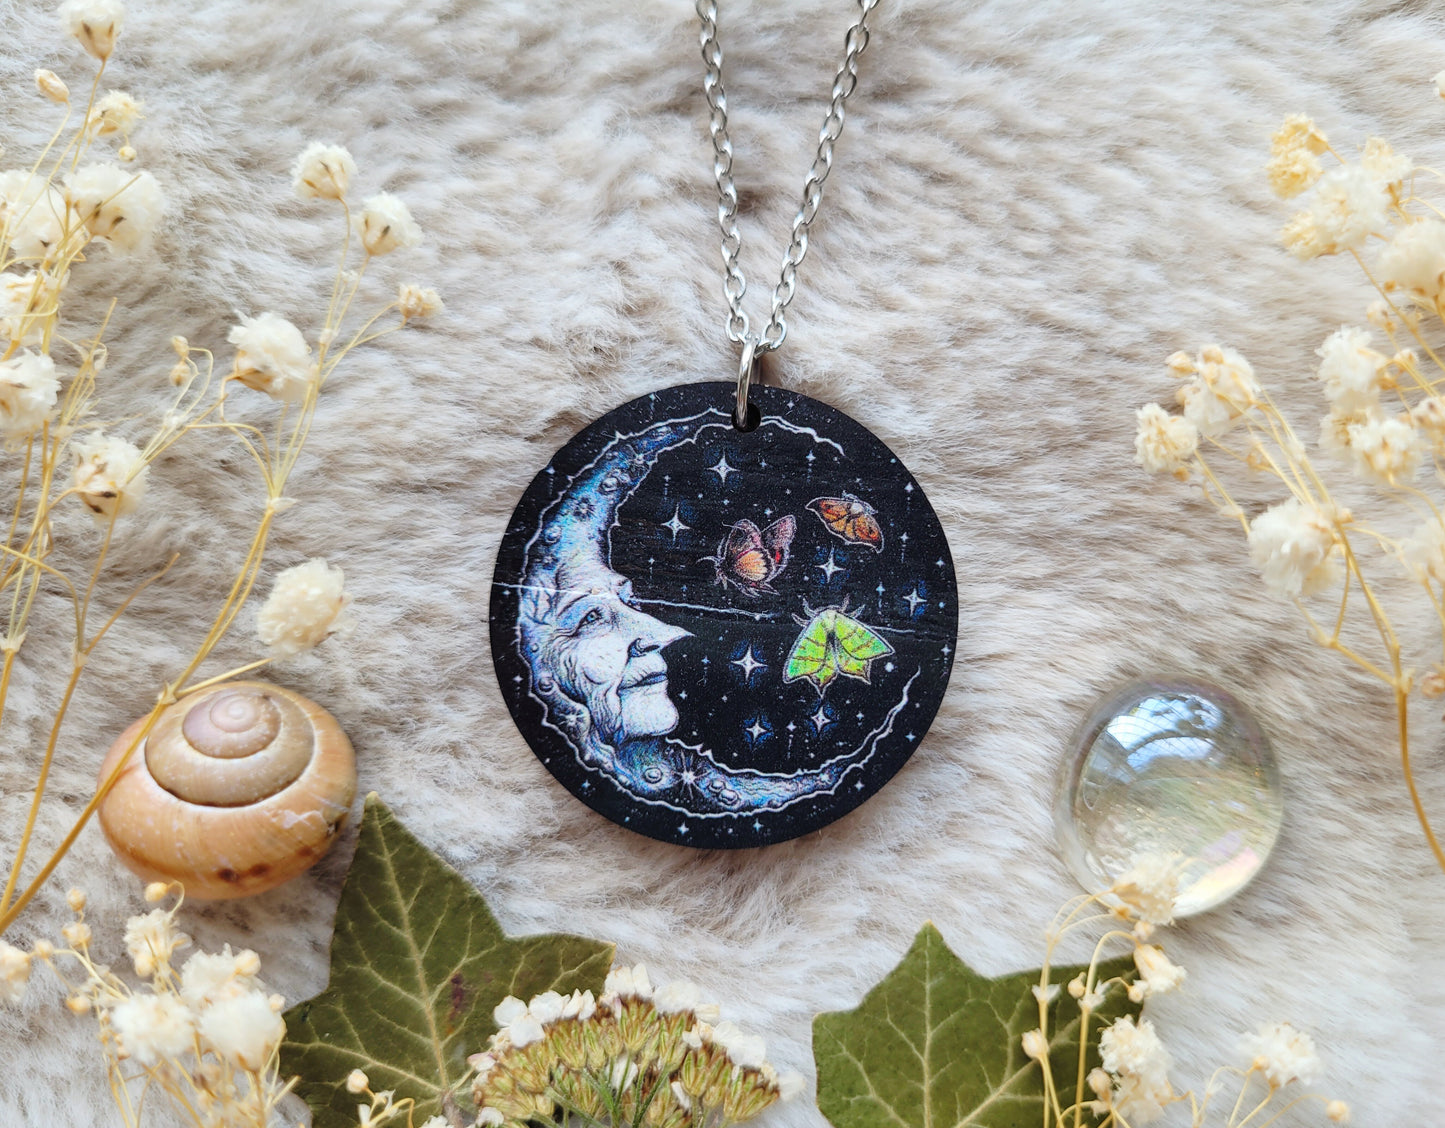 Wise Moon Illustrated necklace, crone, responsibly sourced cherry wood, chain options available, by Grace Moth